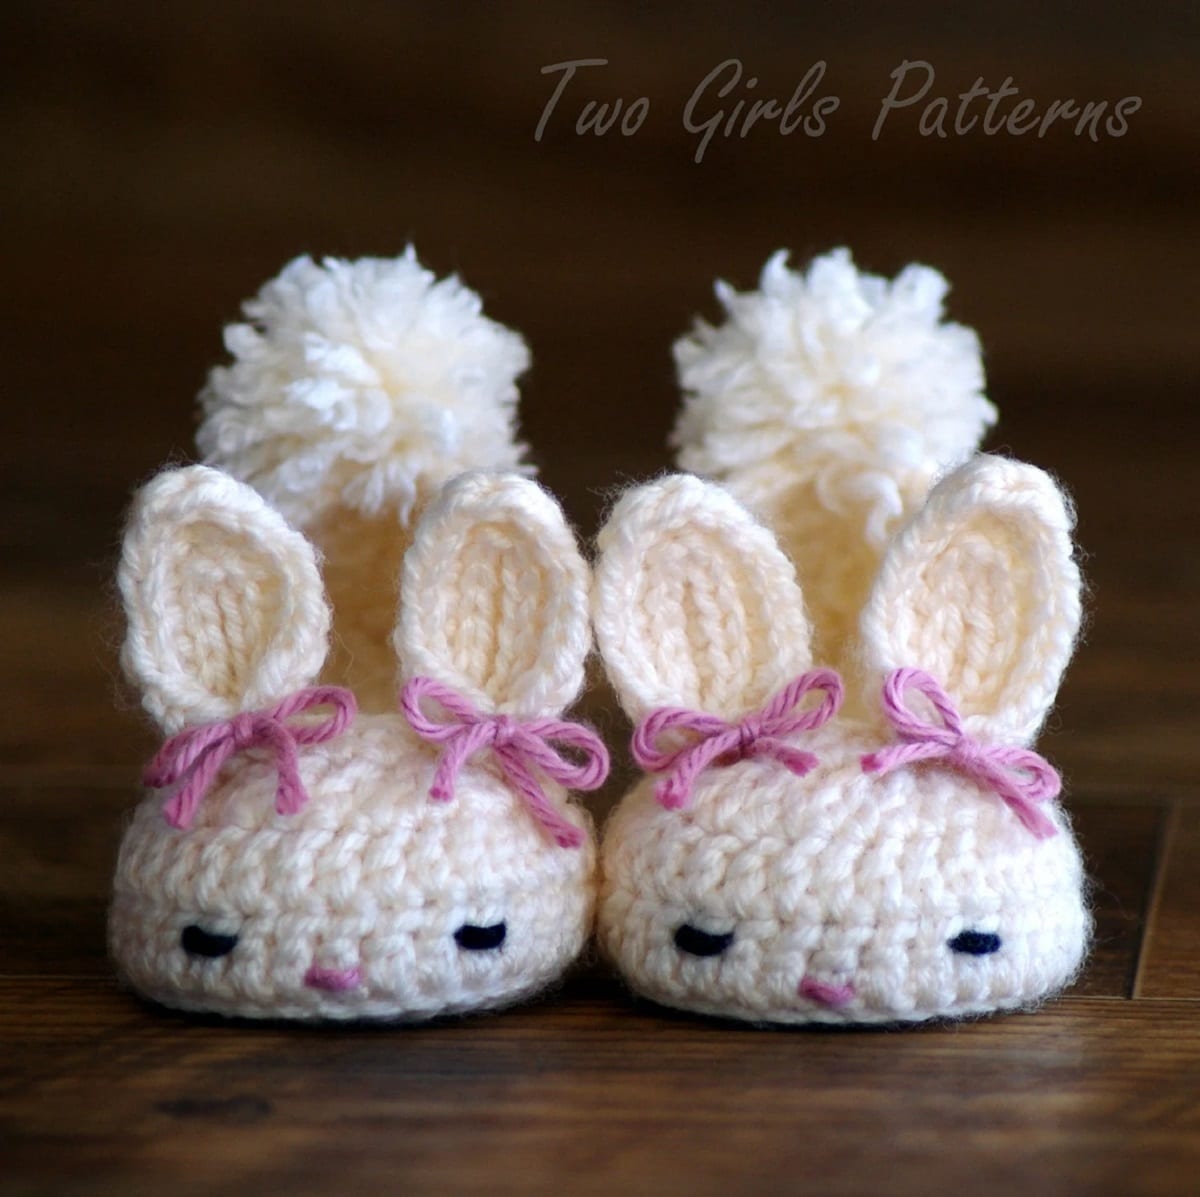 White crochet baby boots with a bunny face, ears with pink bows attached, and a fluffy tail on the back of the boots.